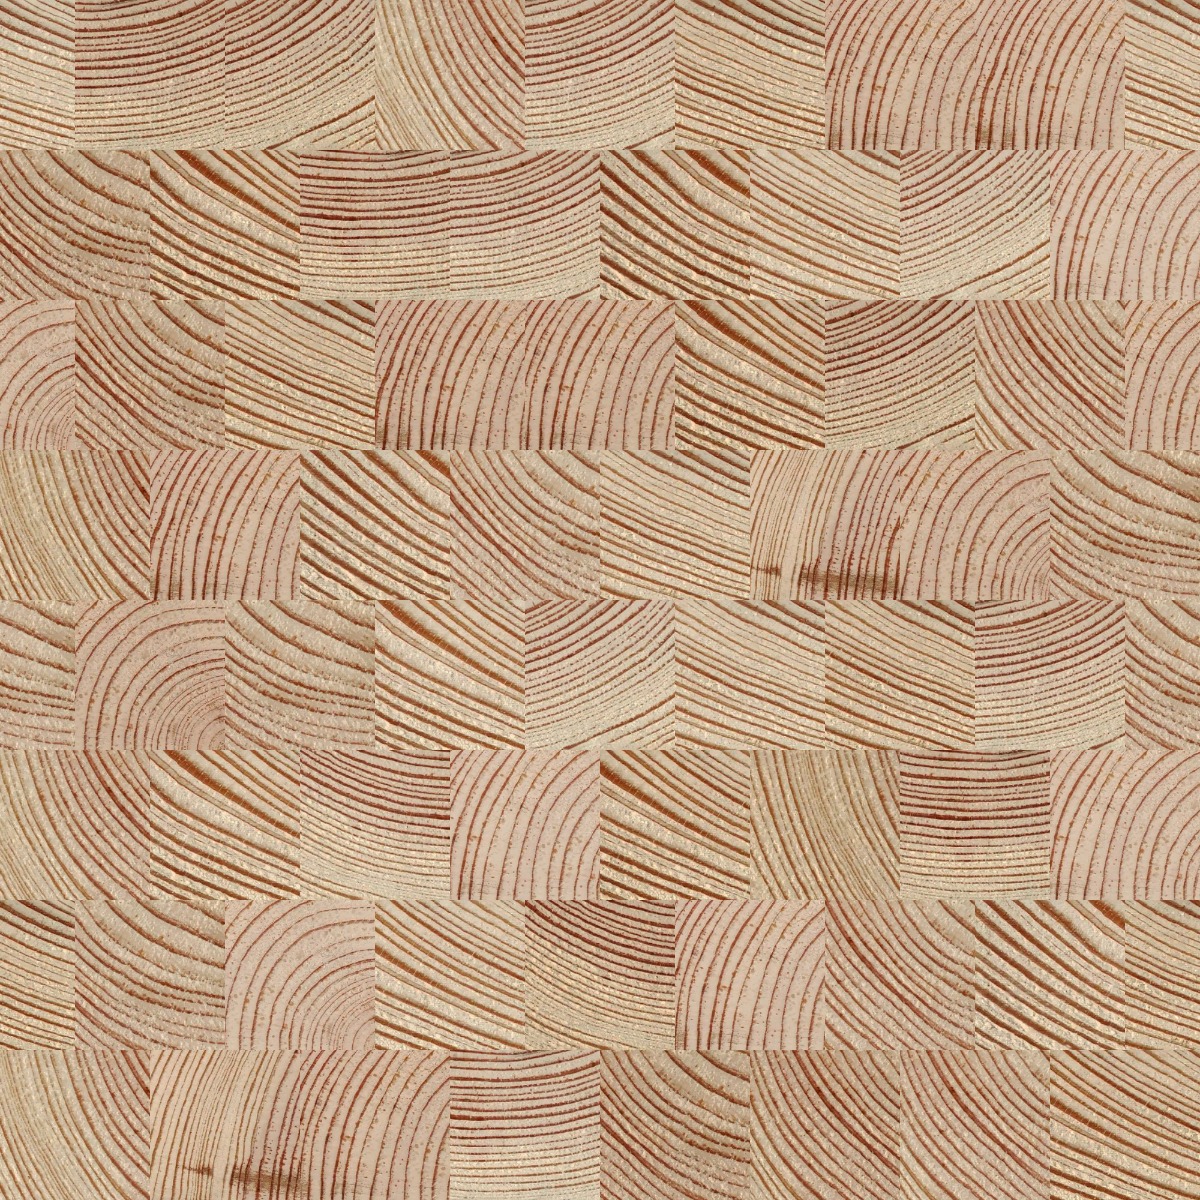 A seamless wood texture with timber end grain boards arranged in a Stretcher pattern